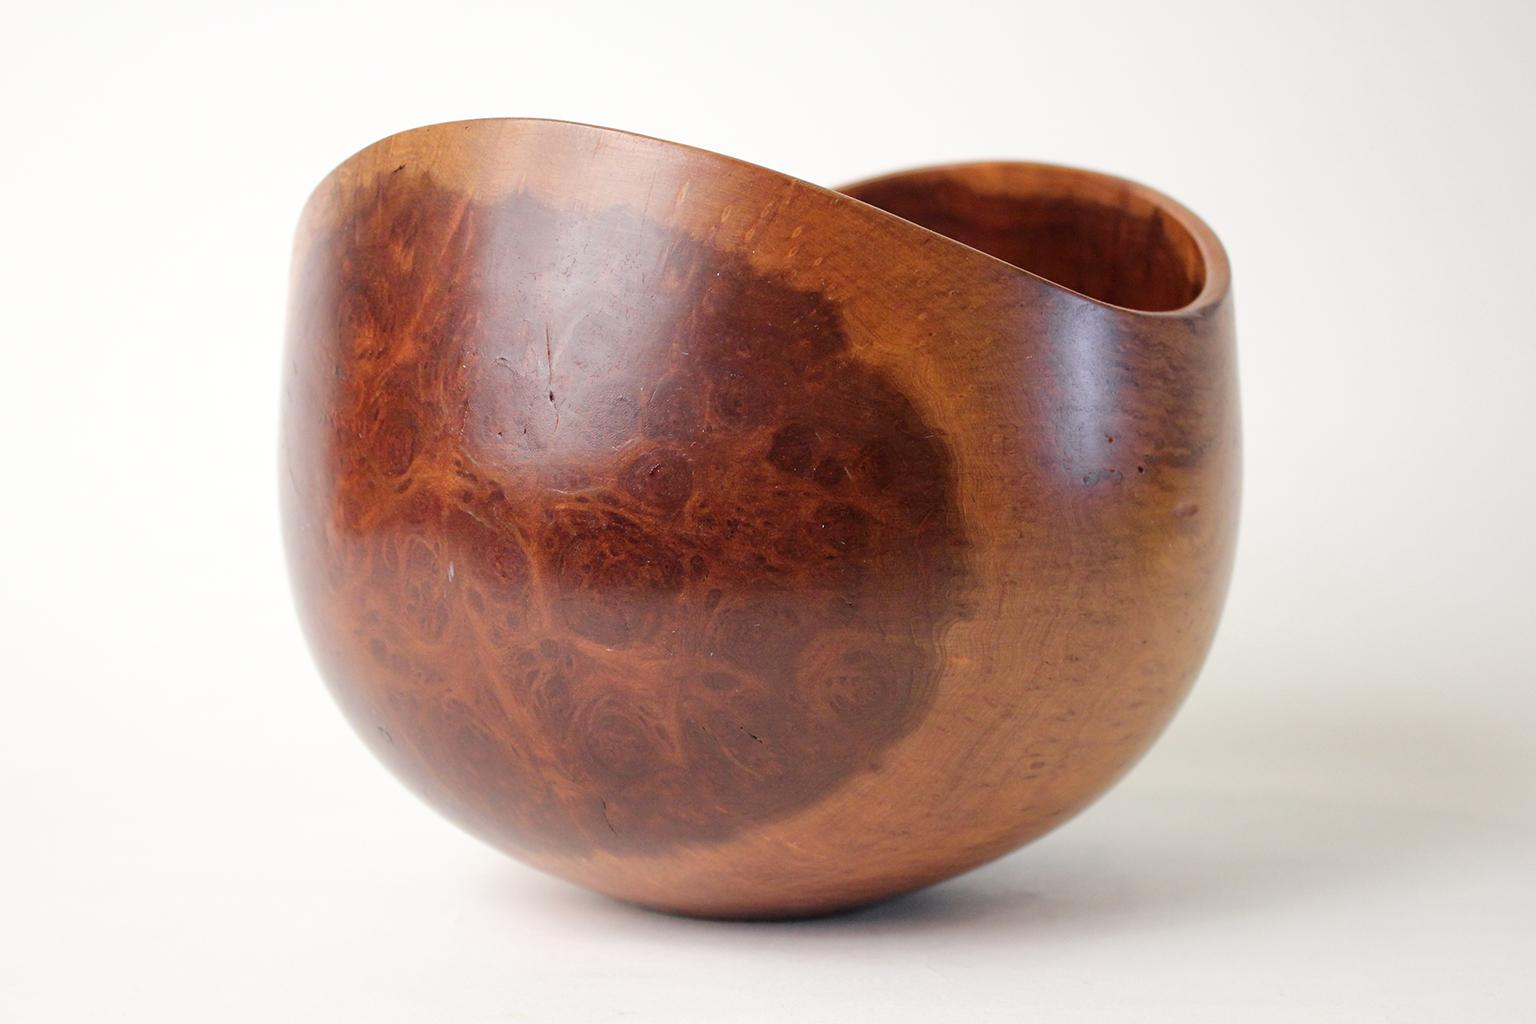 Large Bob Stocksdale Redwood Burl Freeform California Design Turned Art Bowl In Excellent Condition For Sale In San Diego, CA